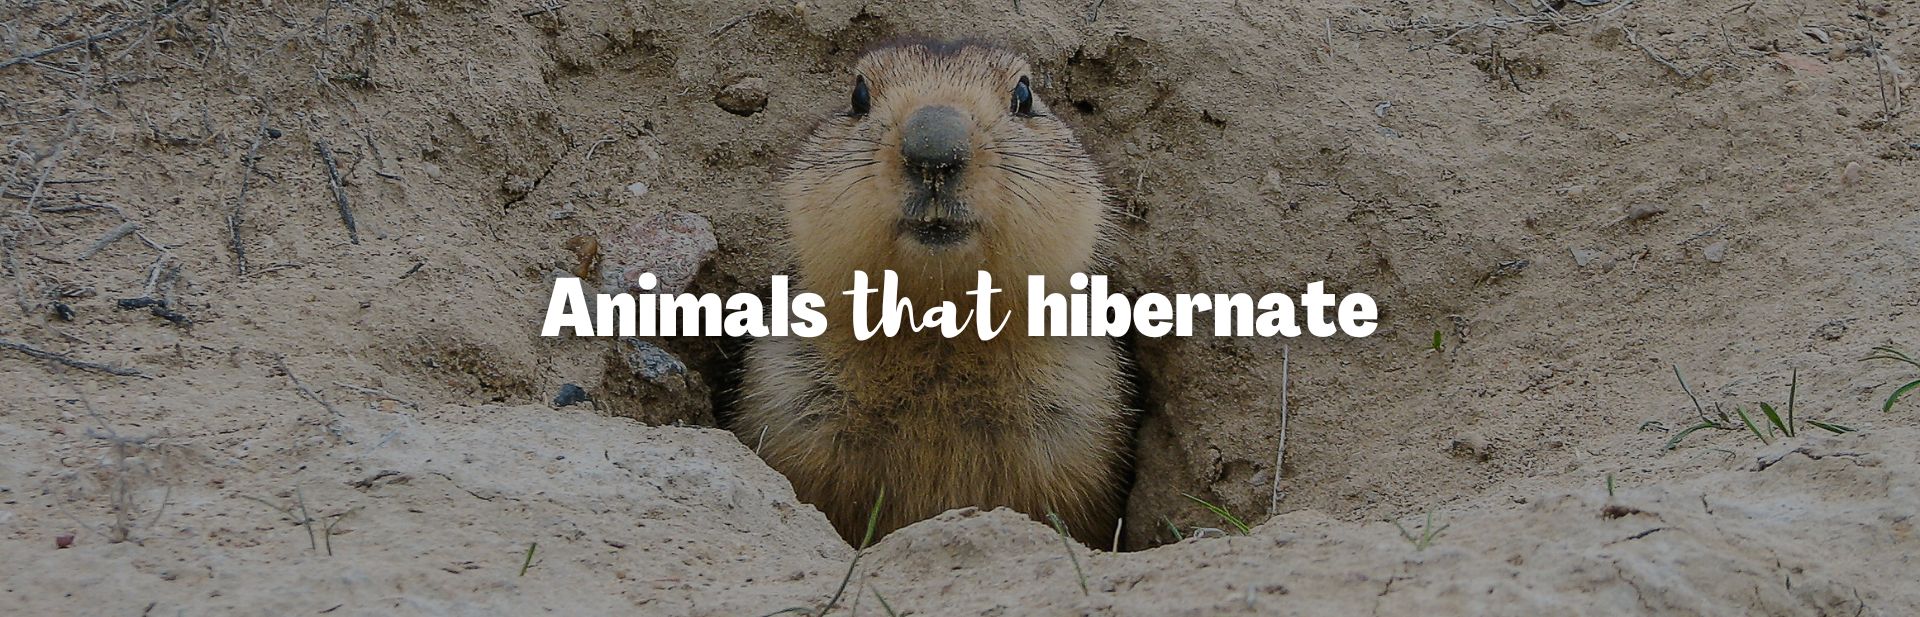 13 Animals That Hibernate: Identification Guide + Pictures and Facts -  Outforia